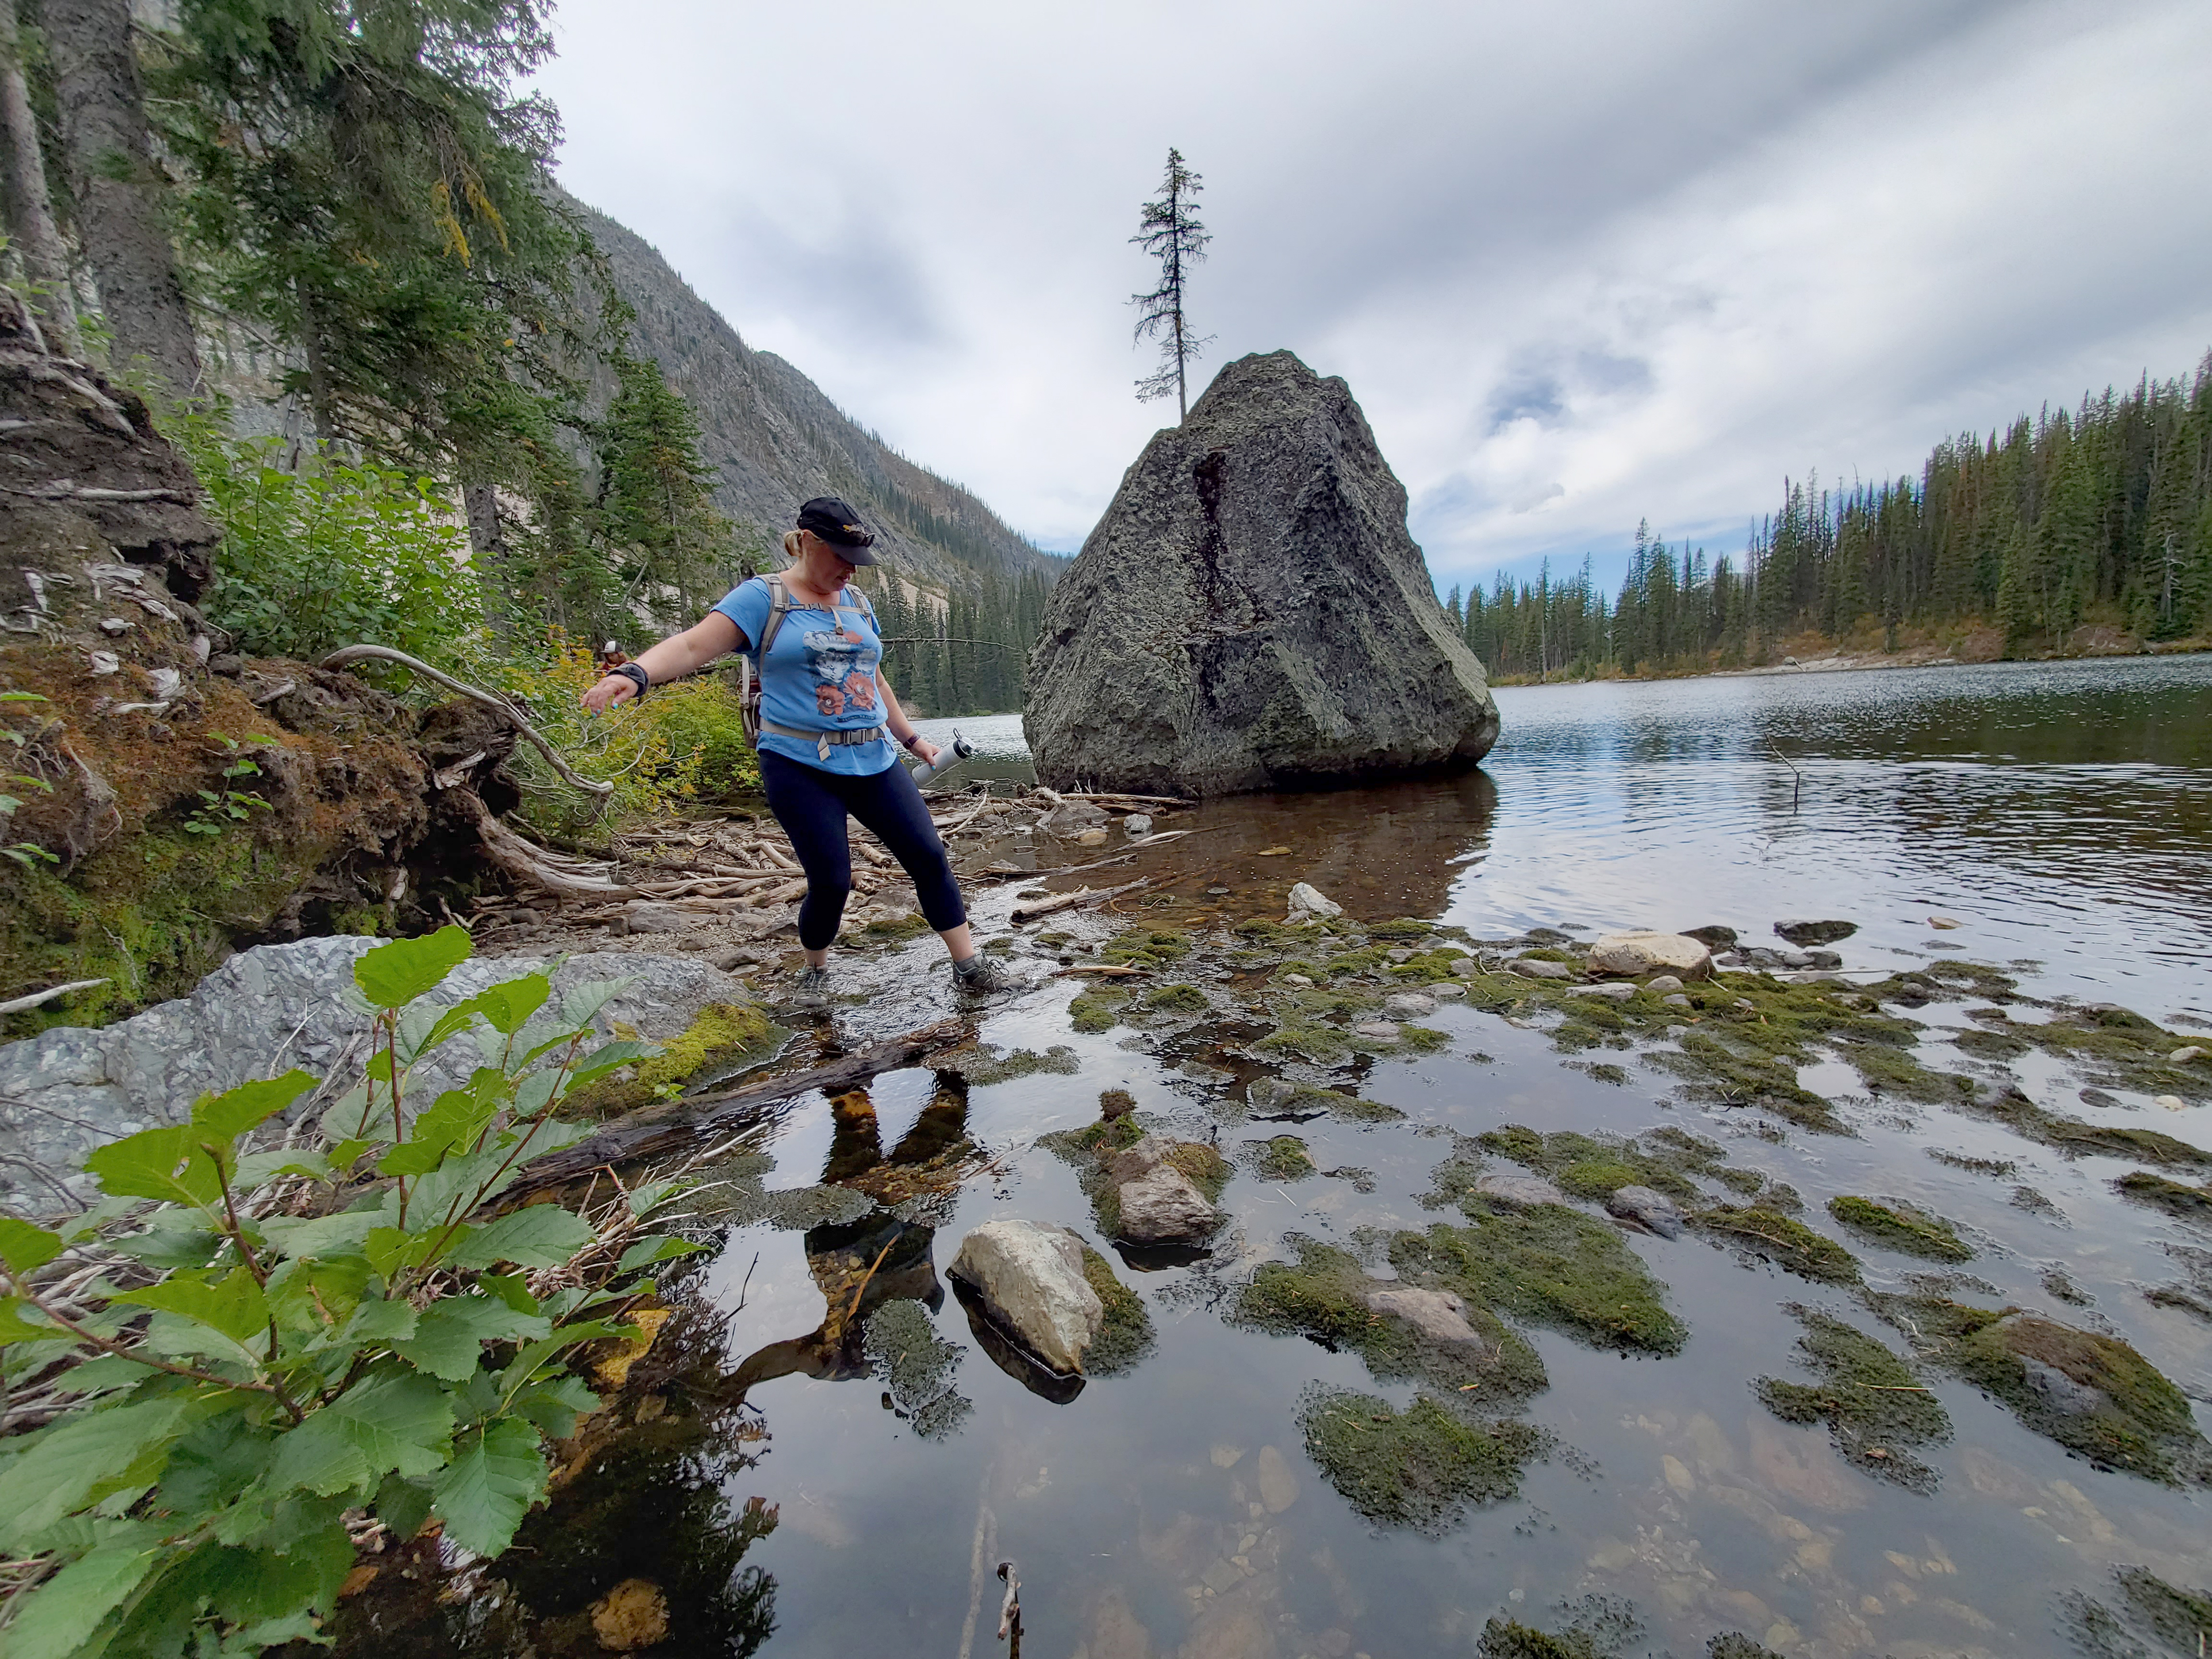 Hiking woman wearing blue t-shirt and ball cap, stepping into water at edge of lake with rocks and moss, and with trees and mountain in background